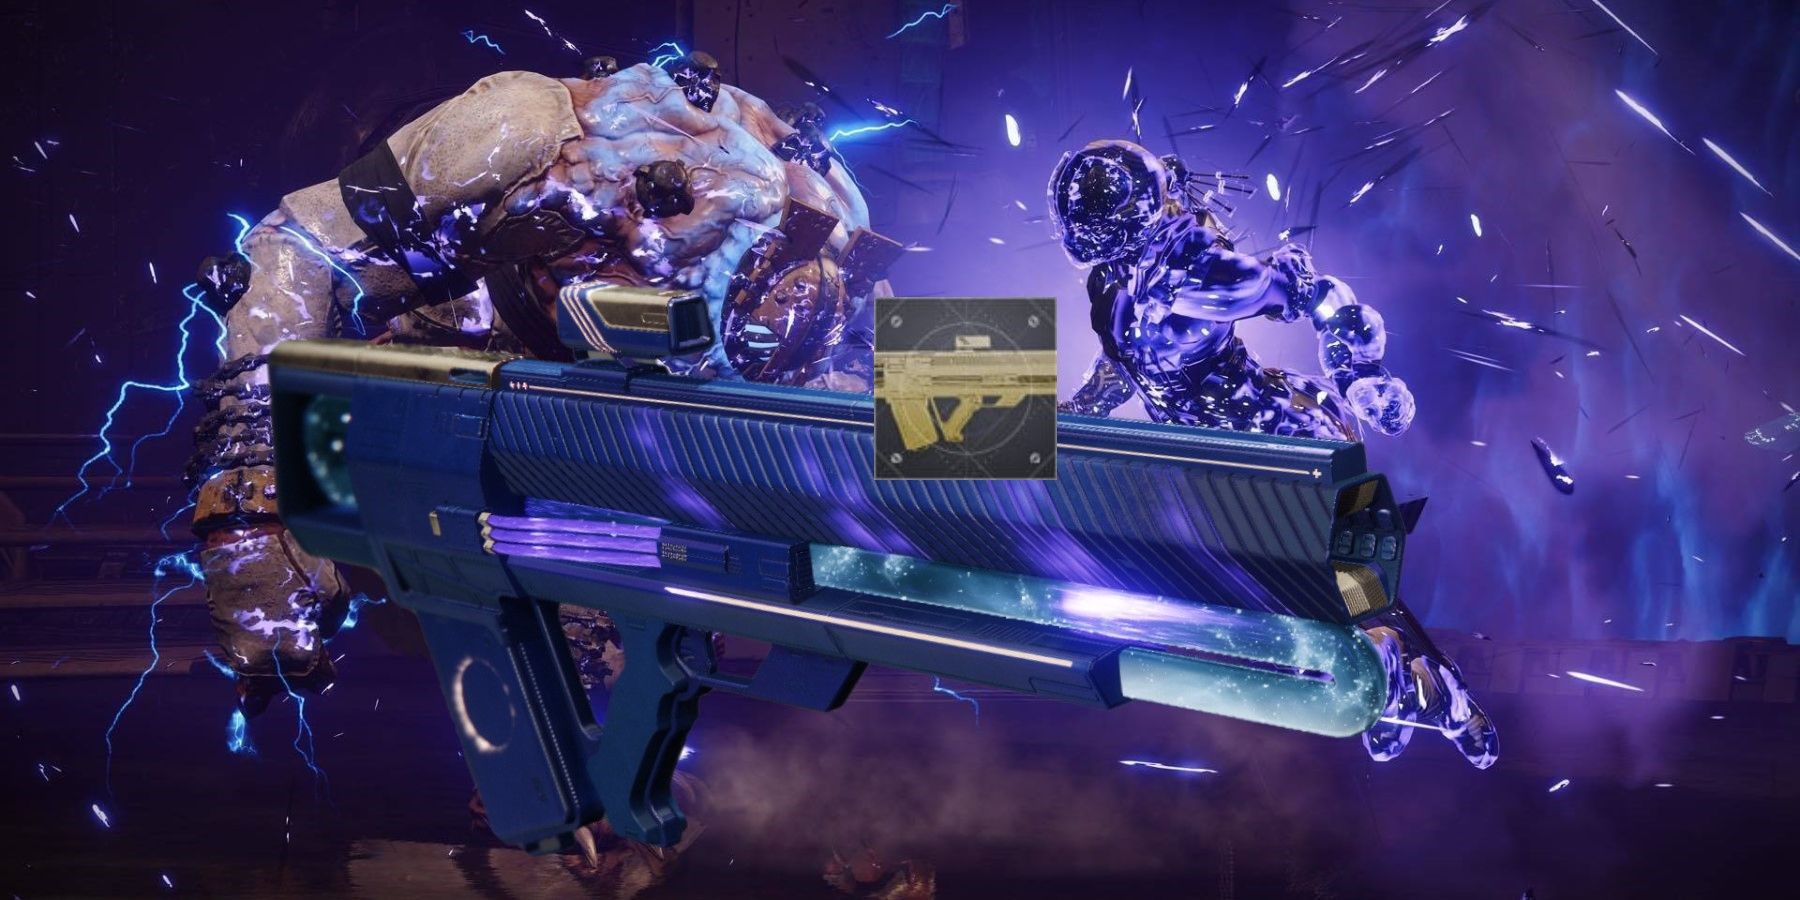 destiny 2 player completes graviton lance catalyst one kill cosmology perk seeking projectiles forsaken campaign first mission the witch queen vaulted